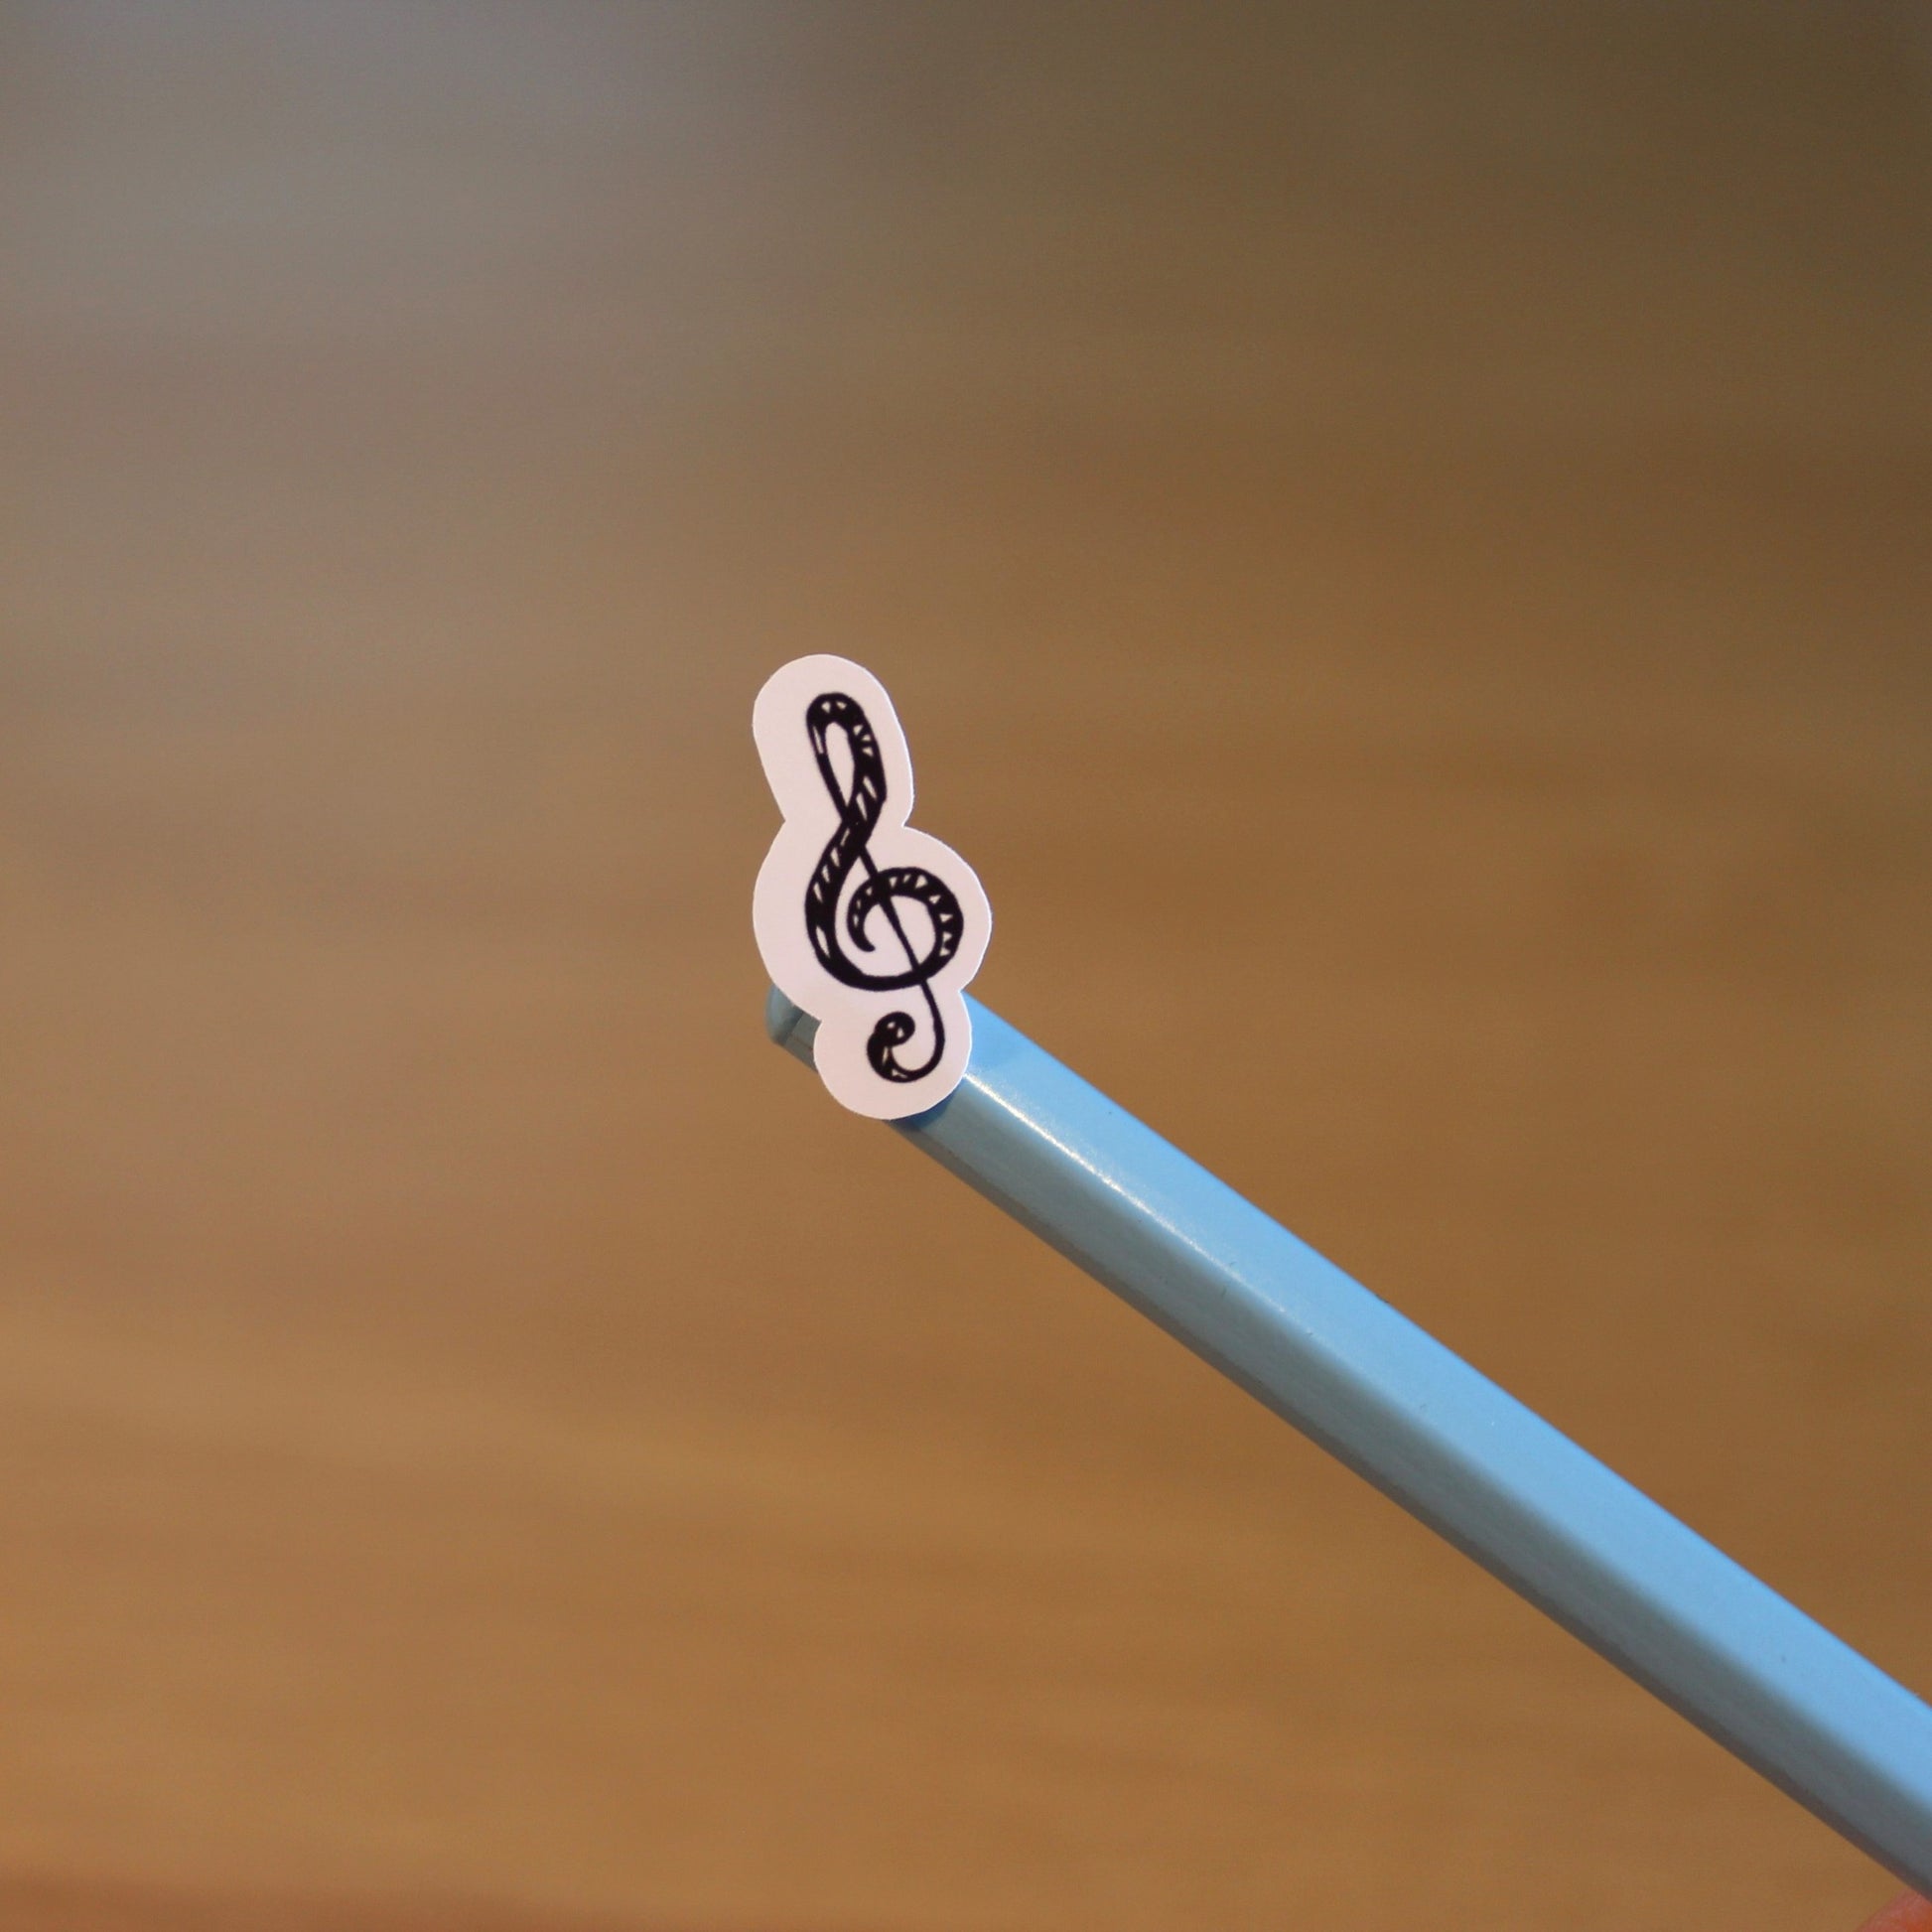 Treble clef symbol sticker displayed on the end of a pencil